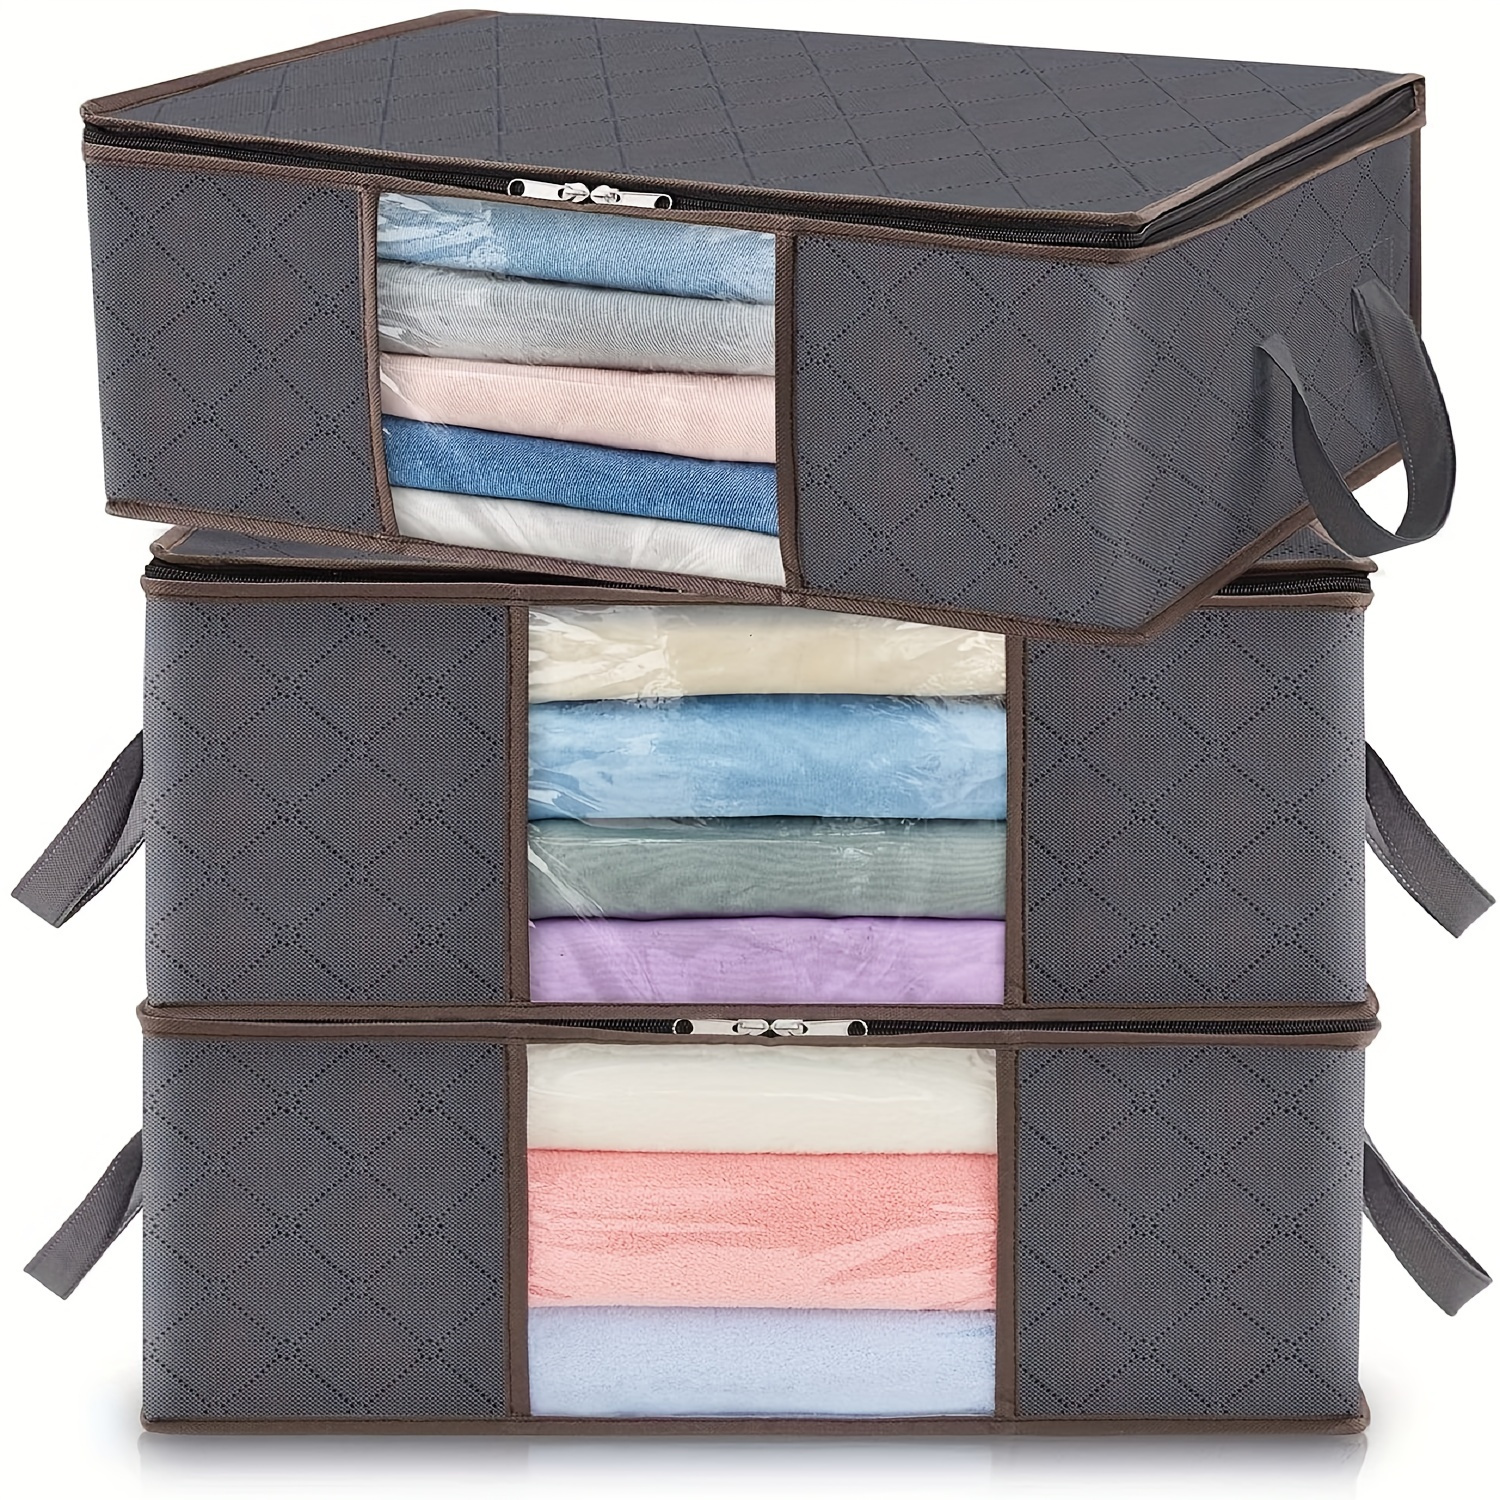 

3pcs Sturdy Foldable Storage Bag With Transparent Windows And Reinforced Handles, Making It Easy To Organize Closets And Winter Clothing